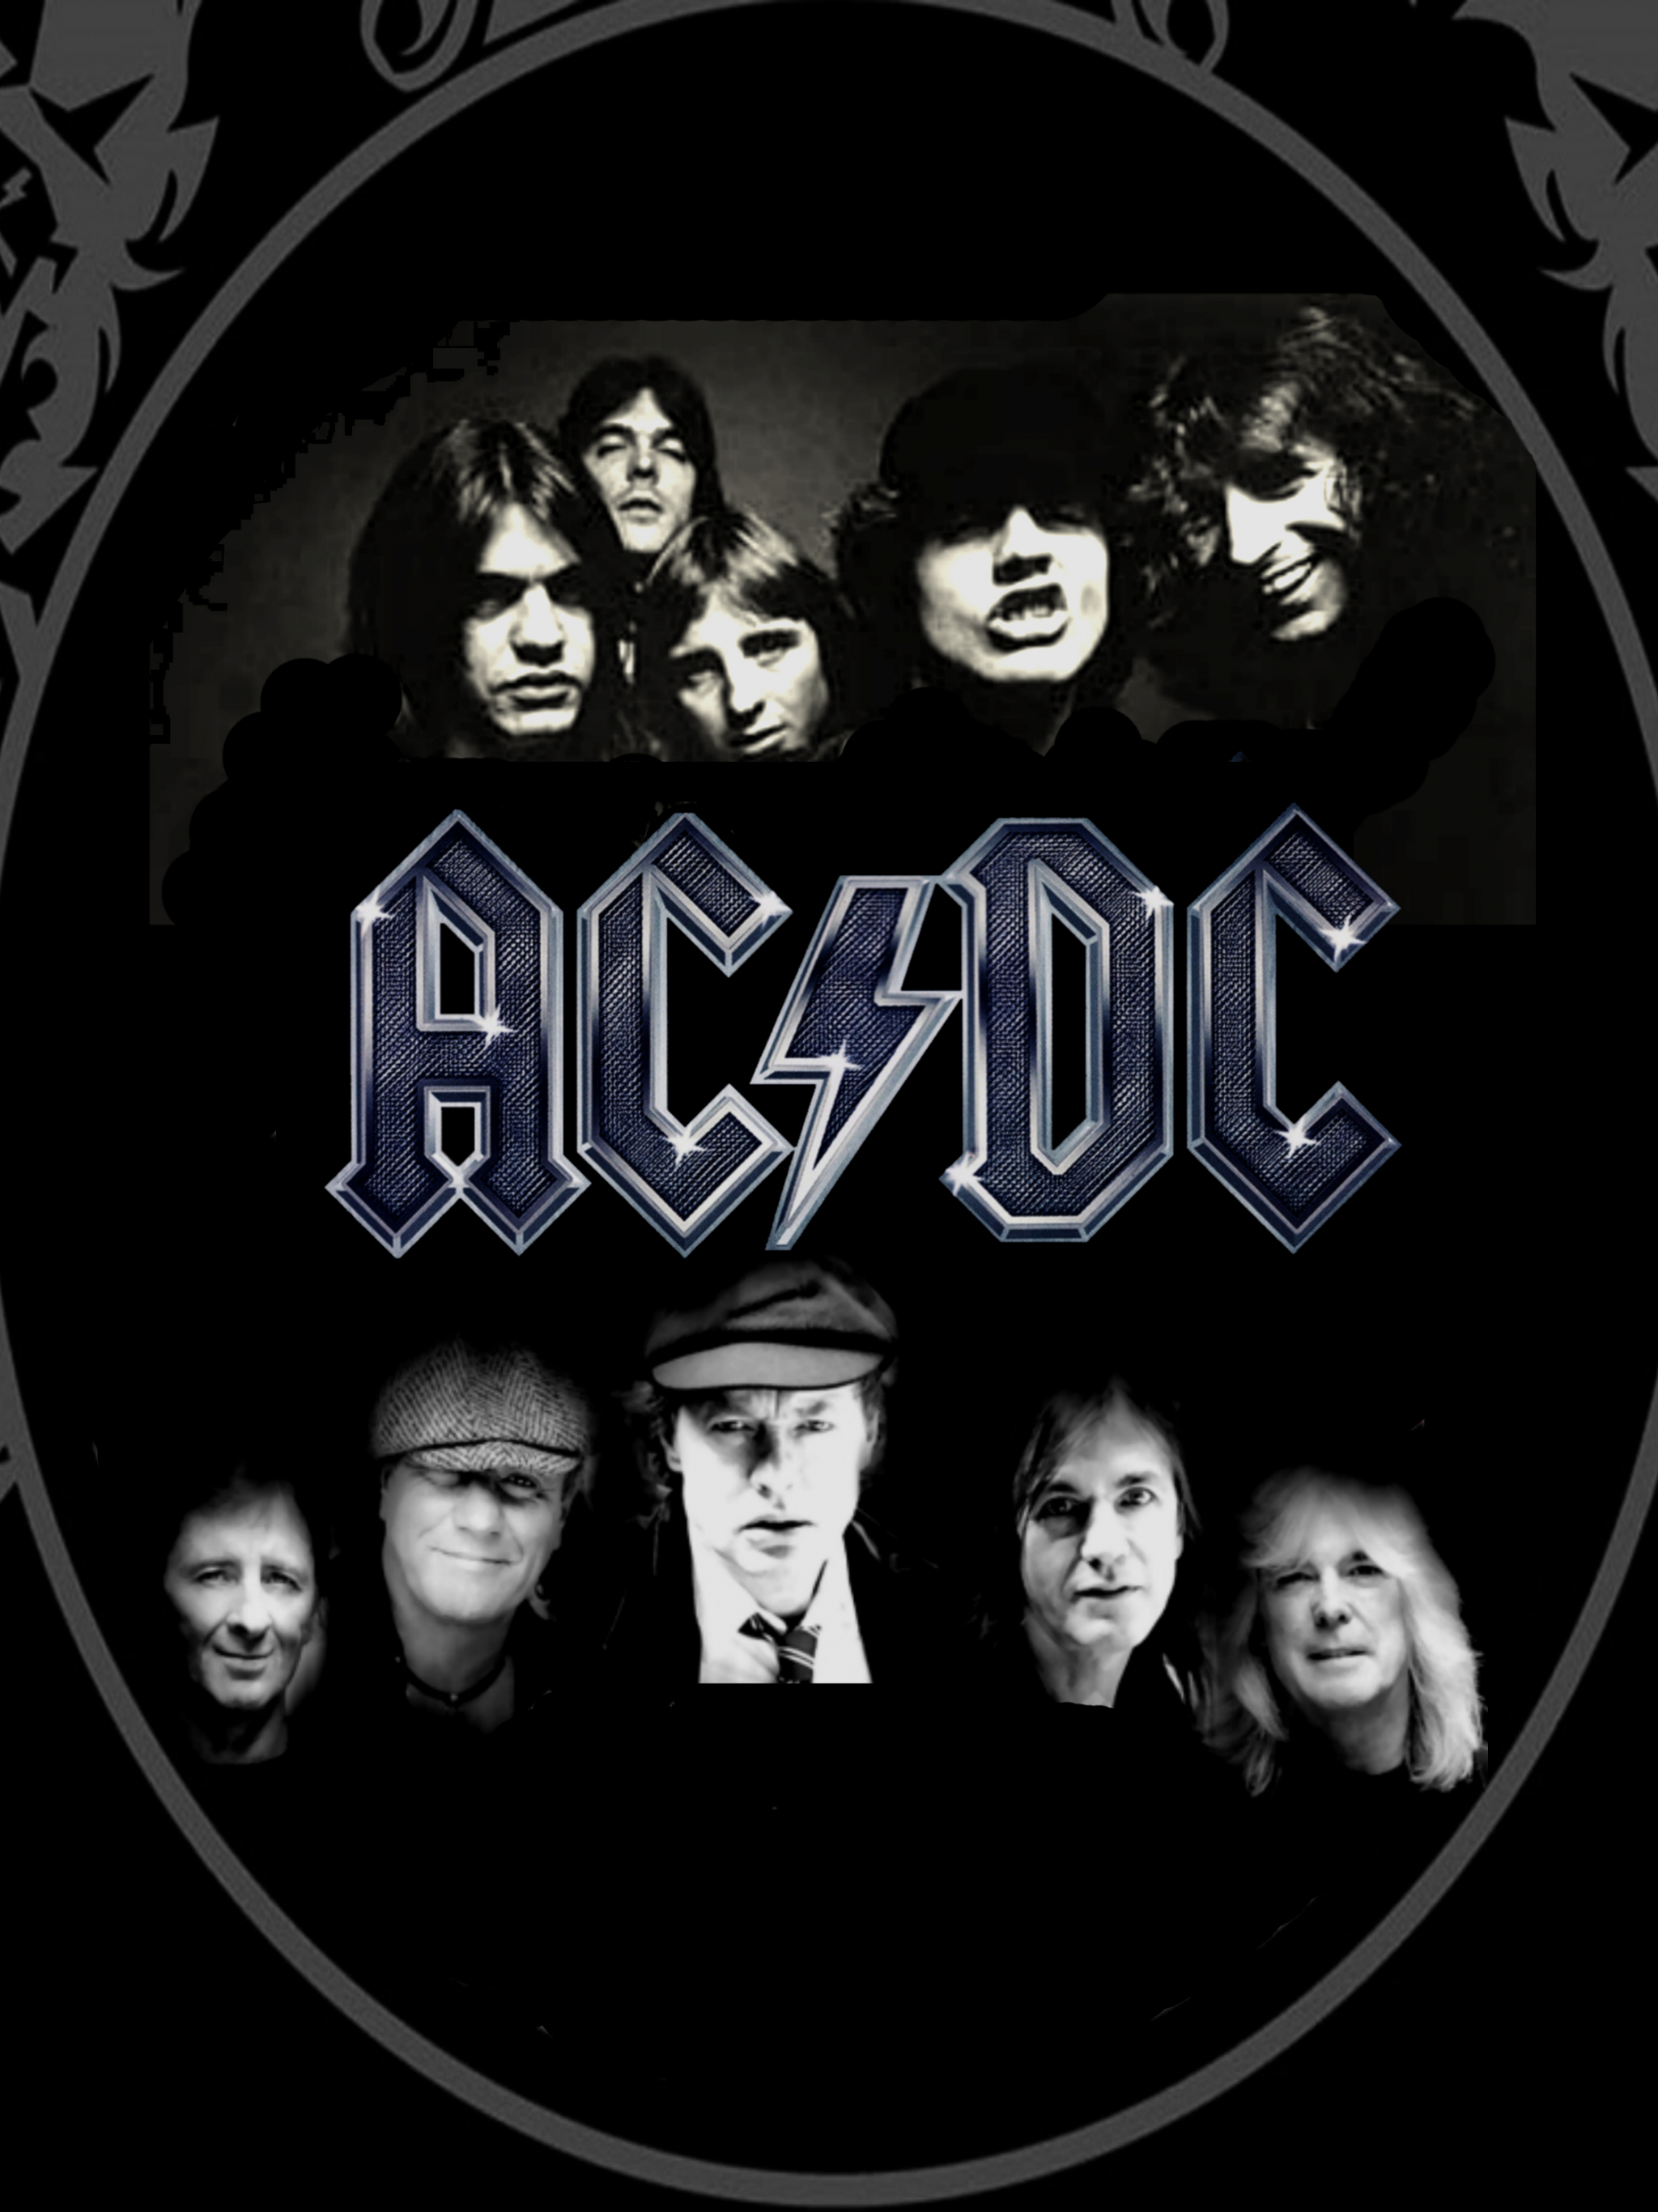 Free Download Ac Dc Wallpaper HD Iphone [4000x3000] For Your Desktop, Mobile & Tablet. Explore Acdc Wallpaper. Cool AC DC Wallpaper